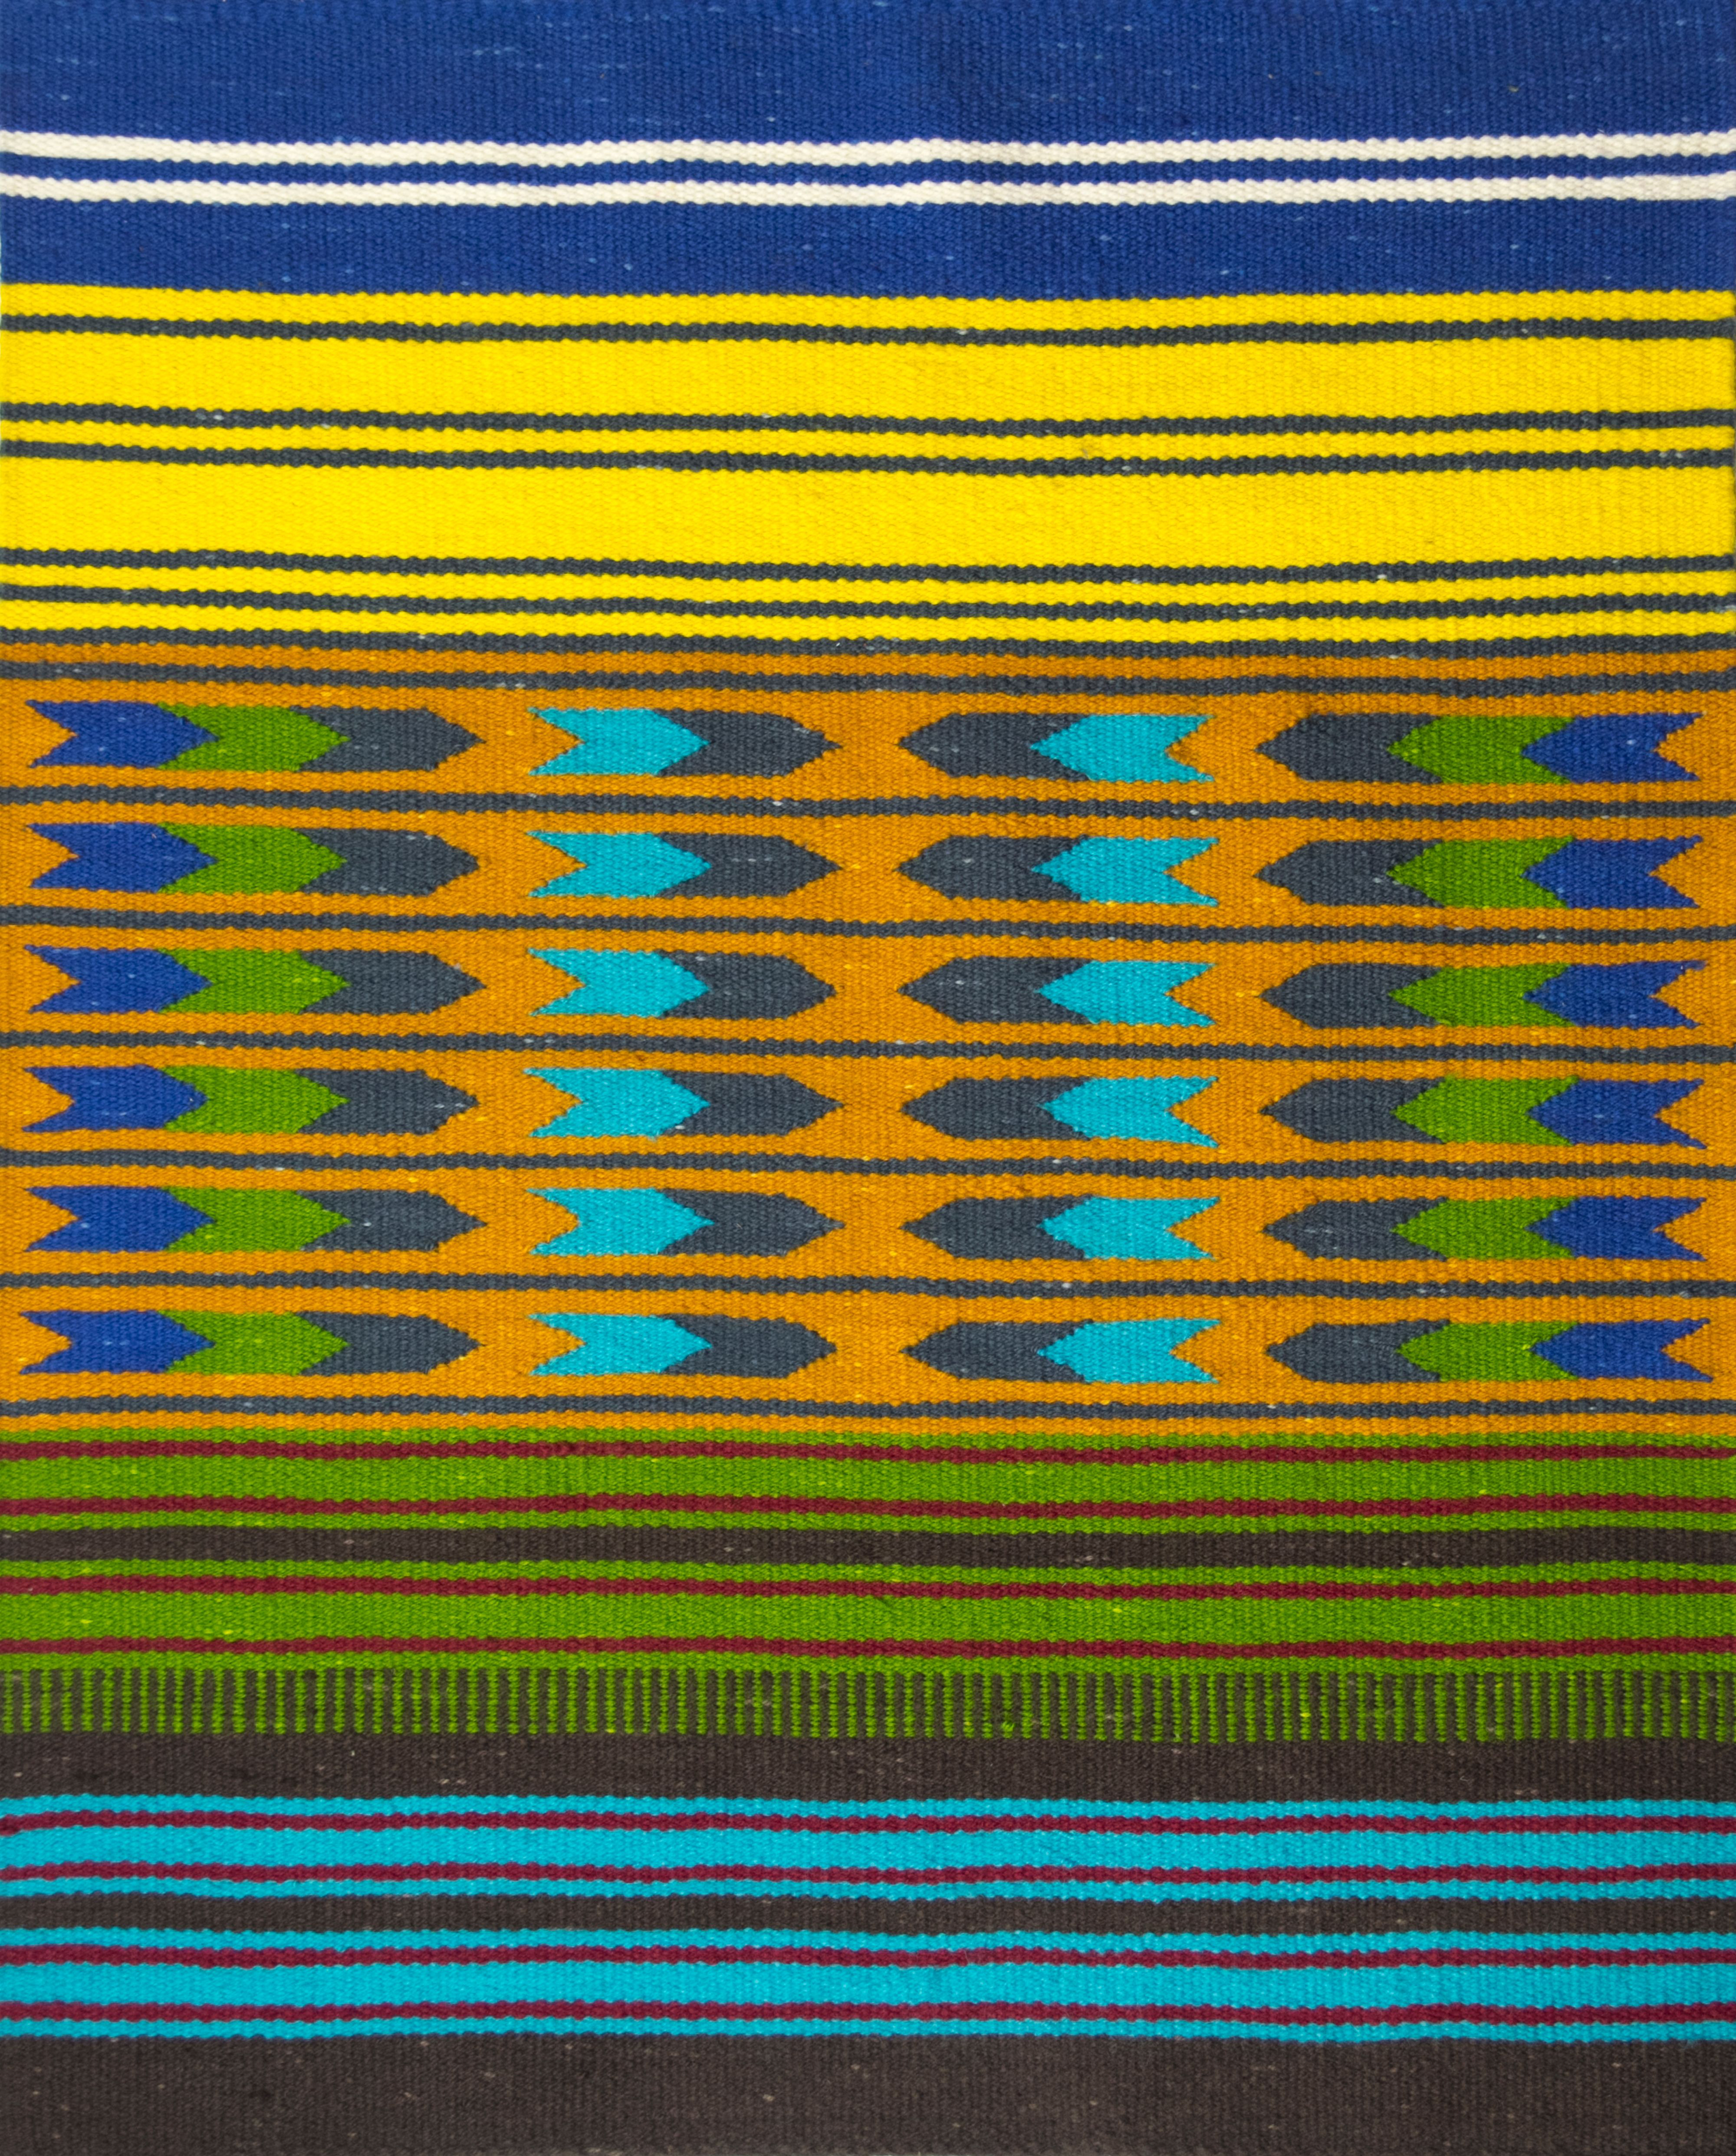 This photograph features a wool rug, dominated by horizontal stripes of blue, yellow, orange, green, and brown. The orange stripes in the center of the rug are embellished with arrow-like, geometric shapes in blue and green.